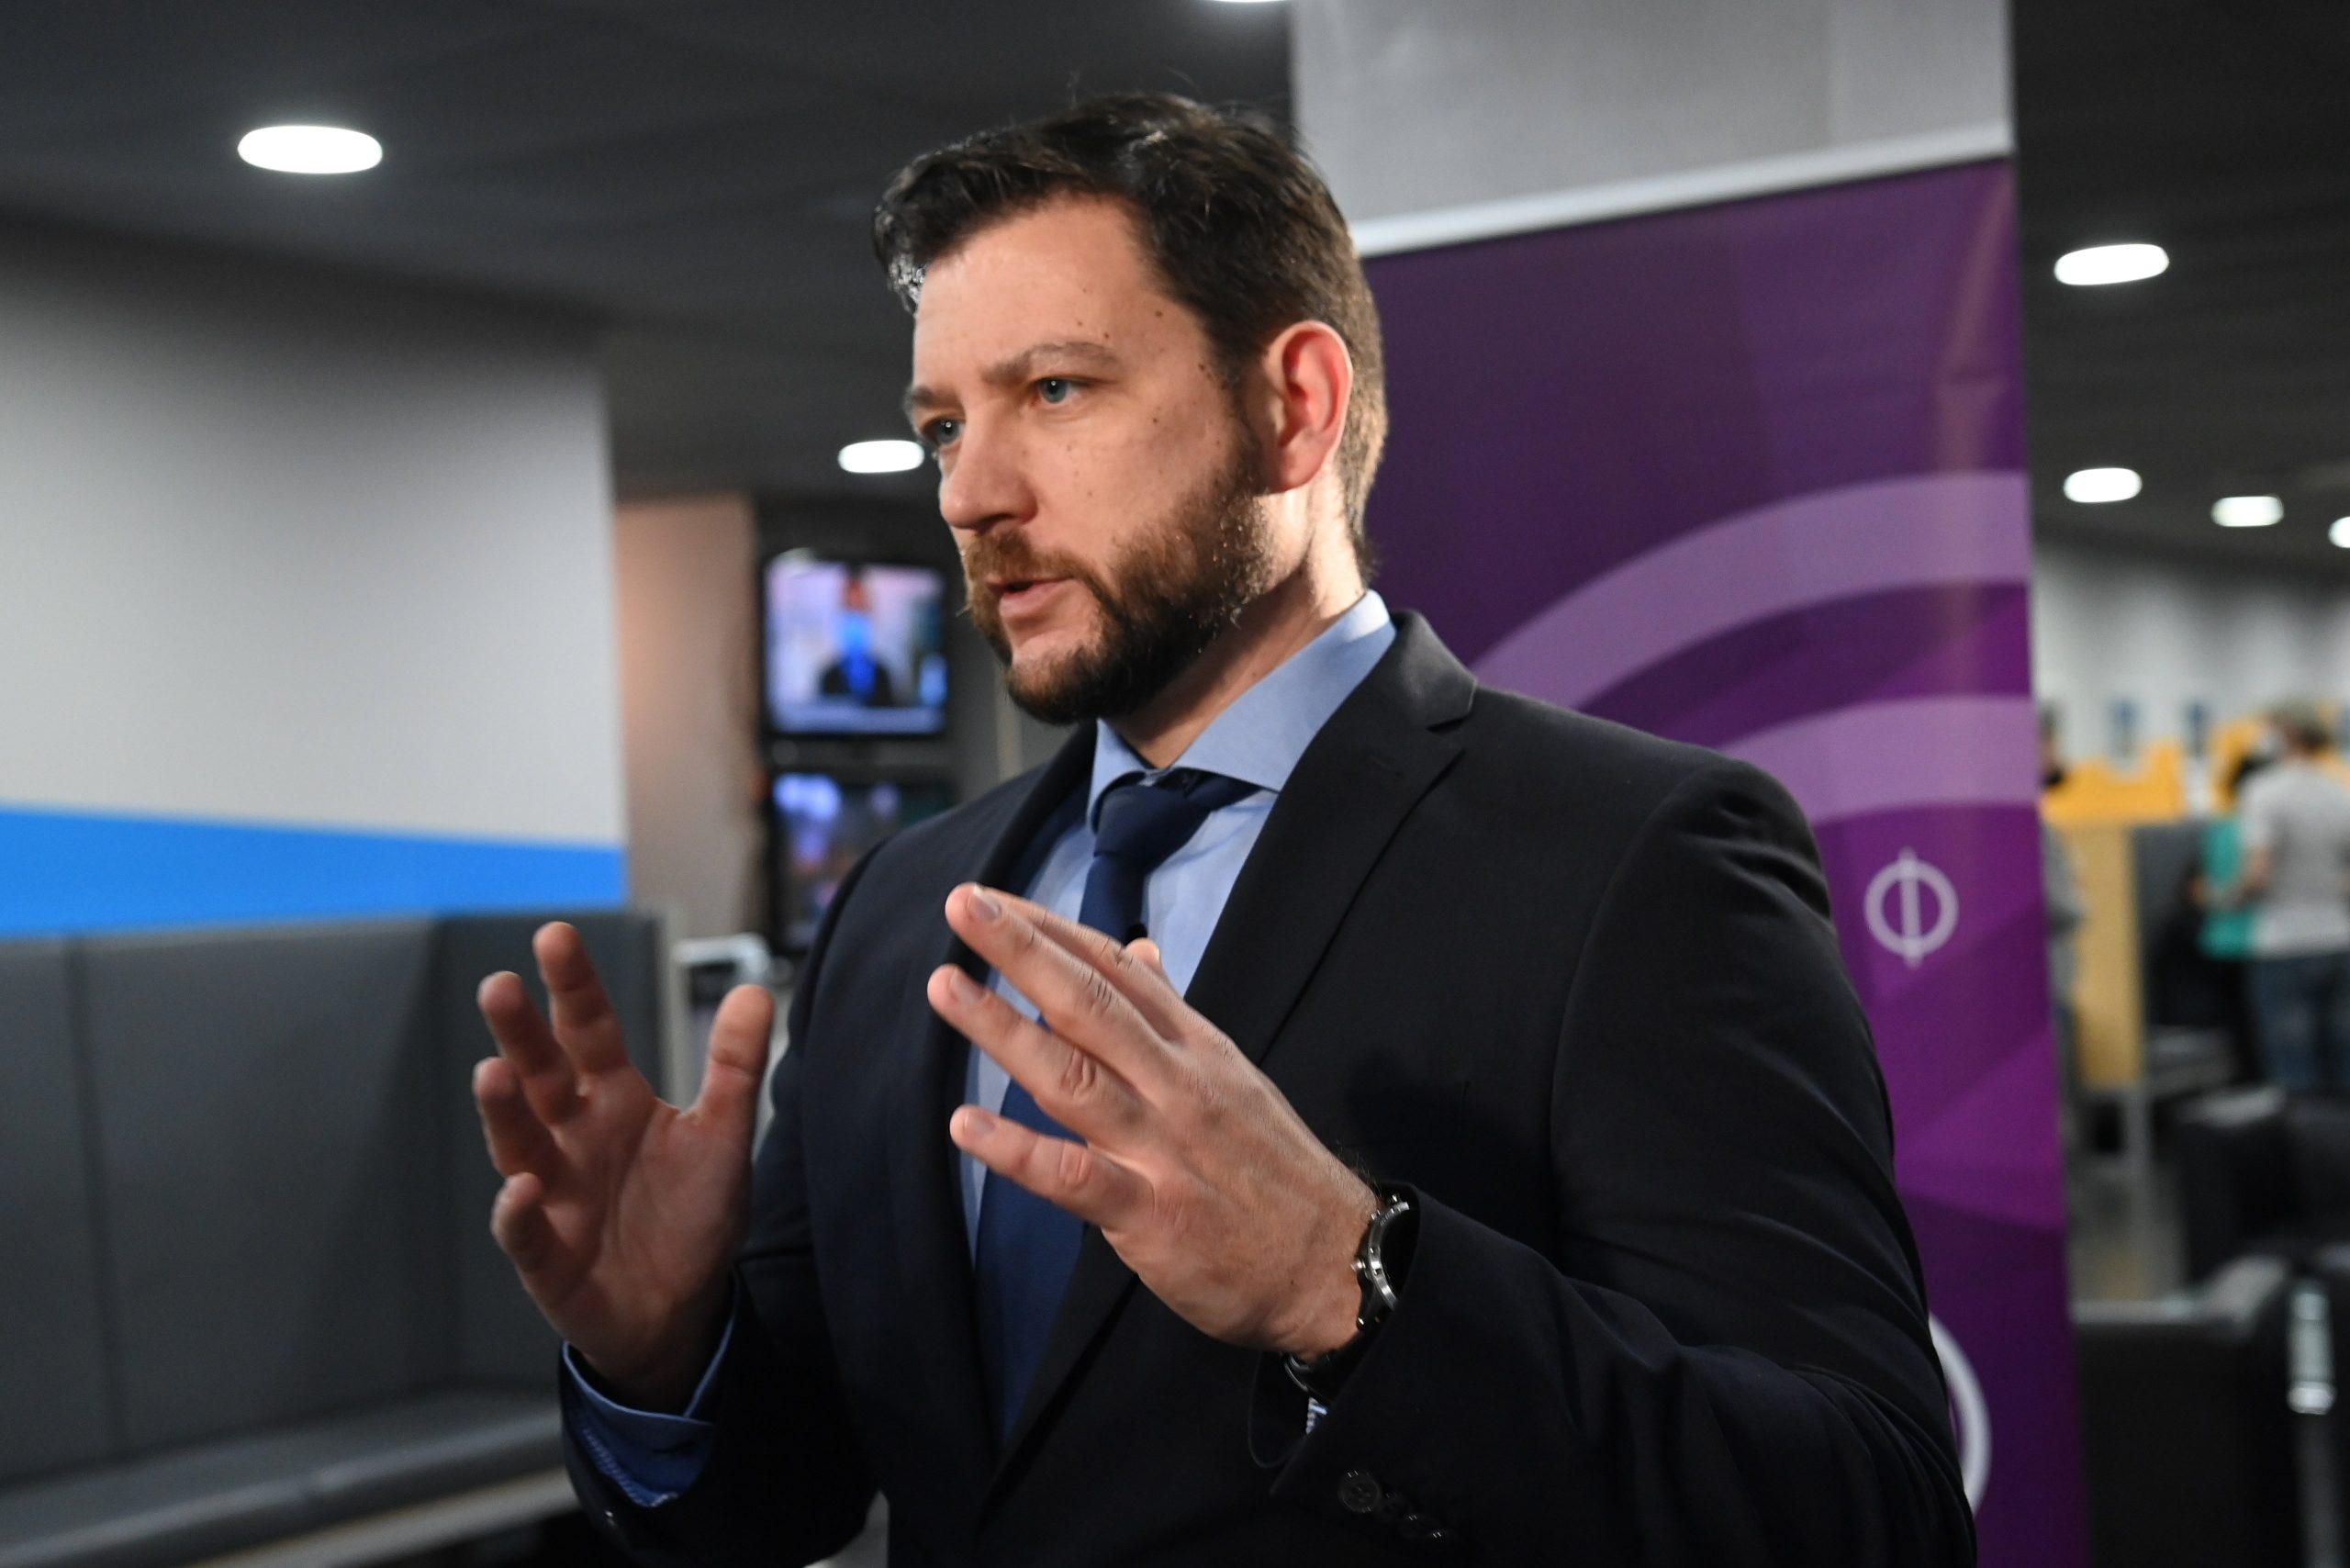 MTVA: OSCE 'Trying to Drag Hungarian Public Media into Politics' with 'Pre-Judged' Report